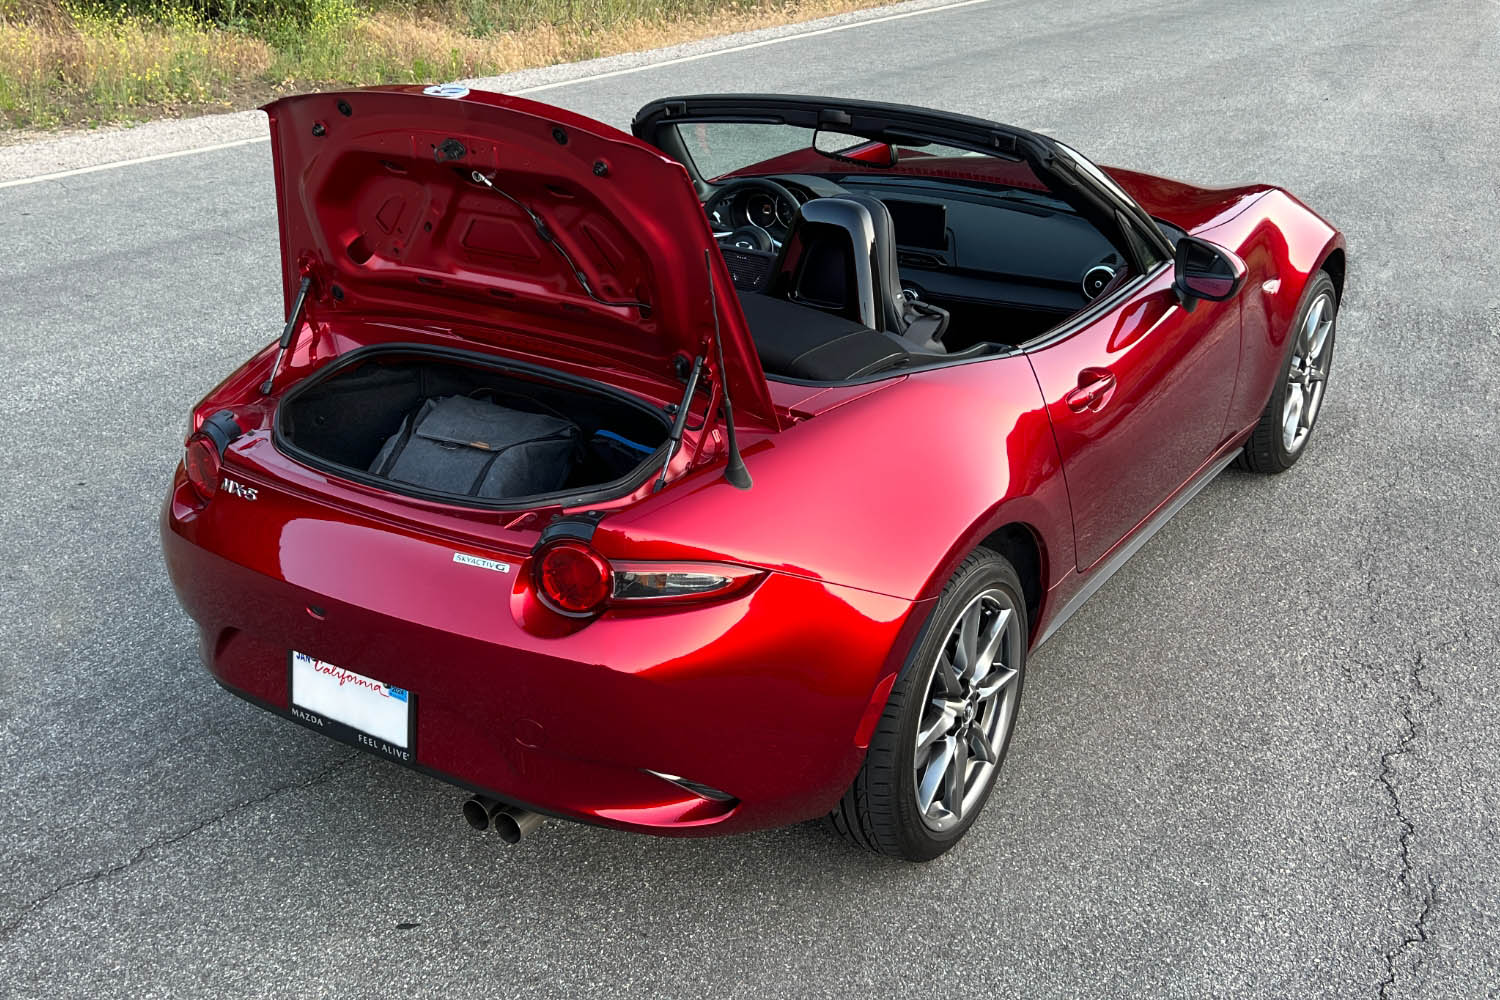 2023 Mazda MX-5 Miata stopped on a country road with its trunk lid open and an overnight bag inside